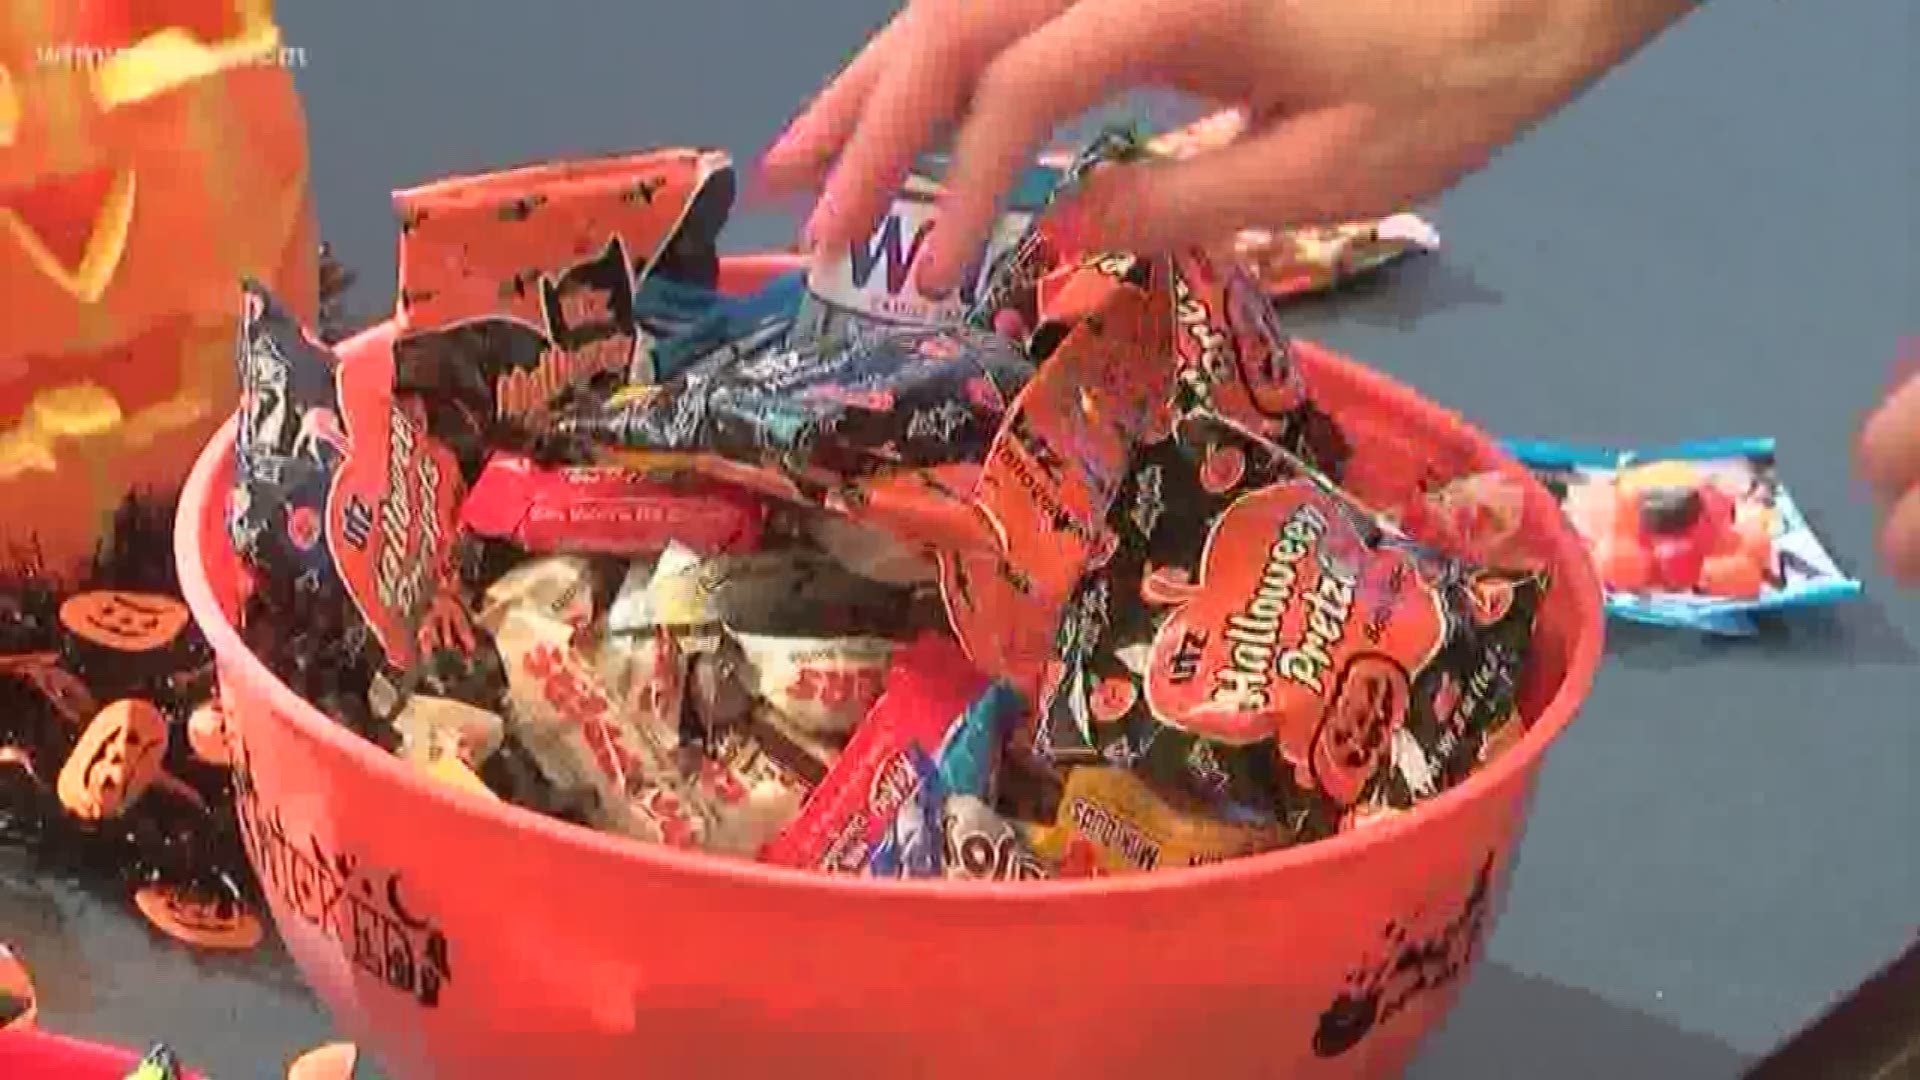 Not all candy is what it seems. The Guilford County Sheriff's Department issued a warning about candy that could be illegal drugs.